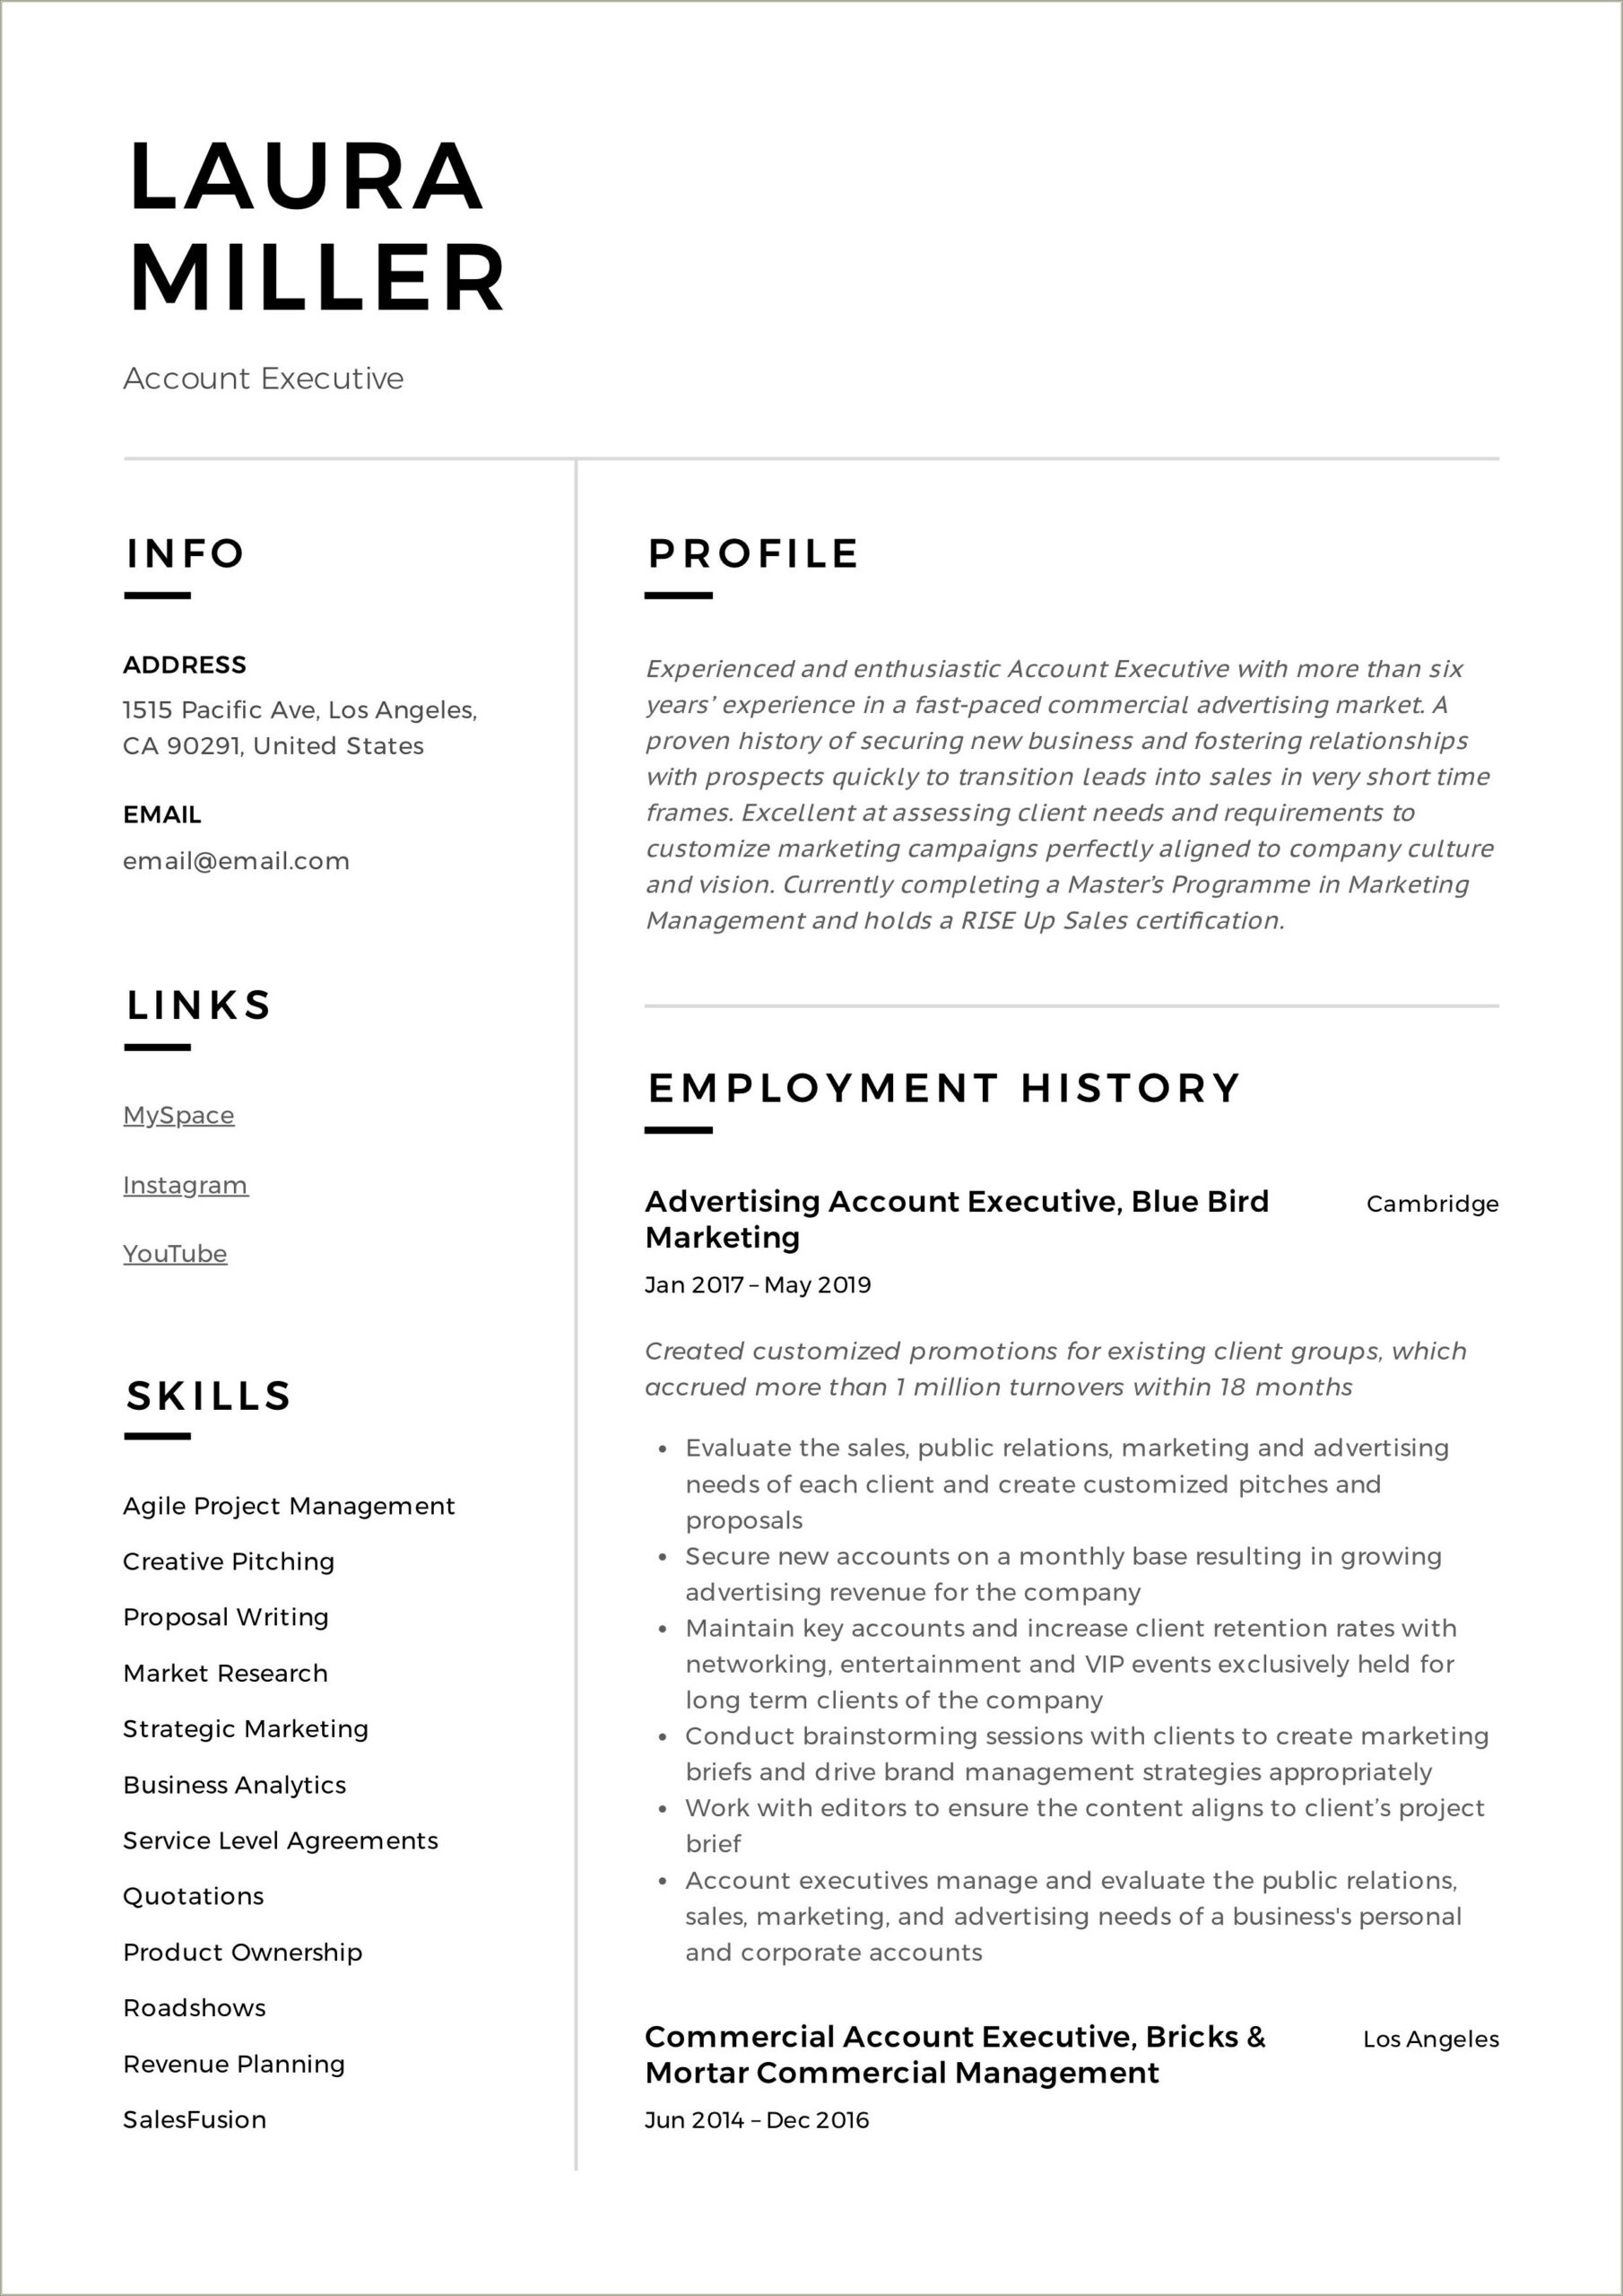 Examples Of An Executive Summary On A Resume